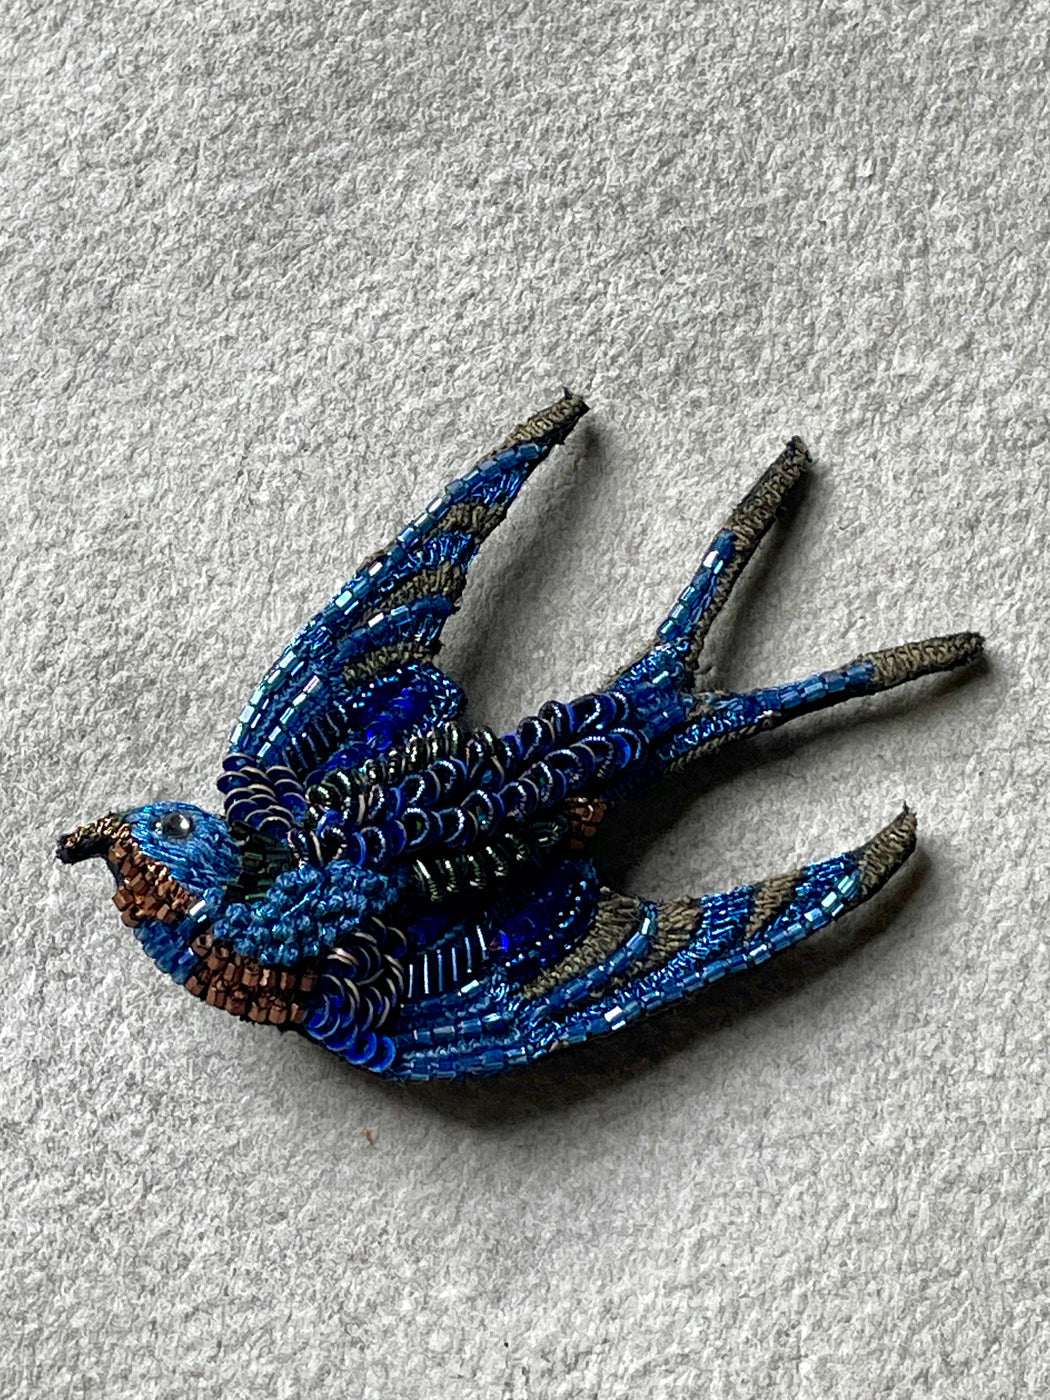 "Singing Swallow" Brooch by Trovelore